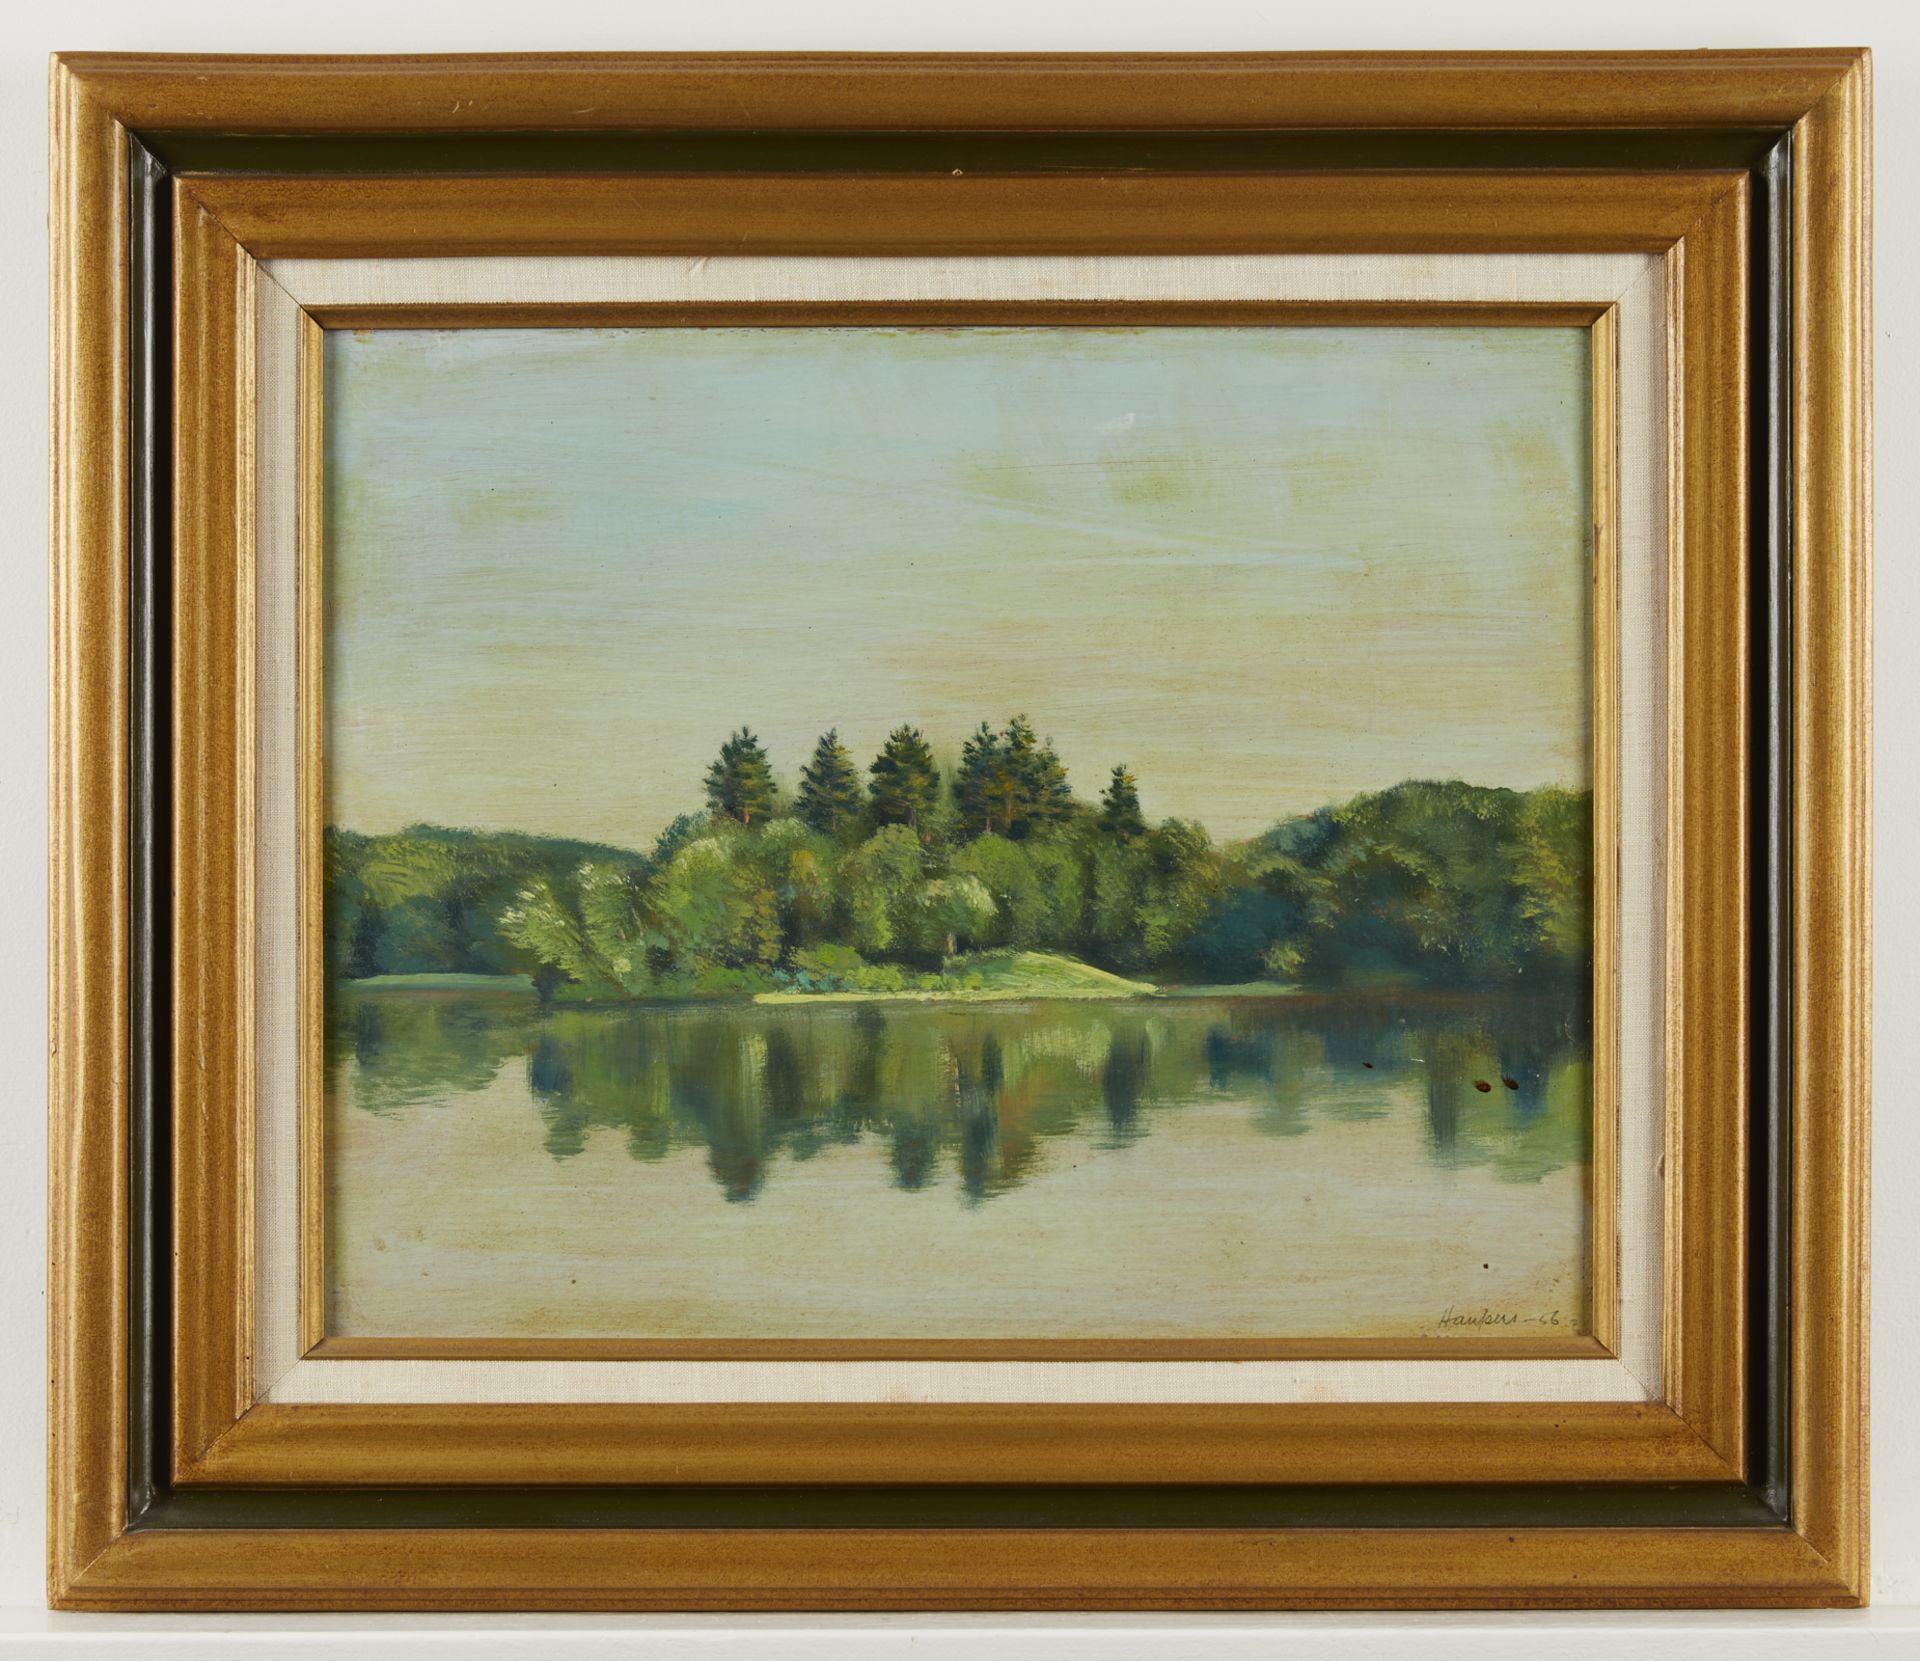 Clement Haupers "Spencer Lake" Painting 1956 - Image 2 of 8